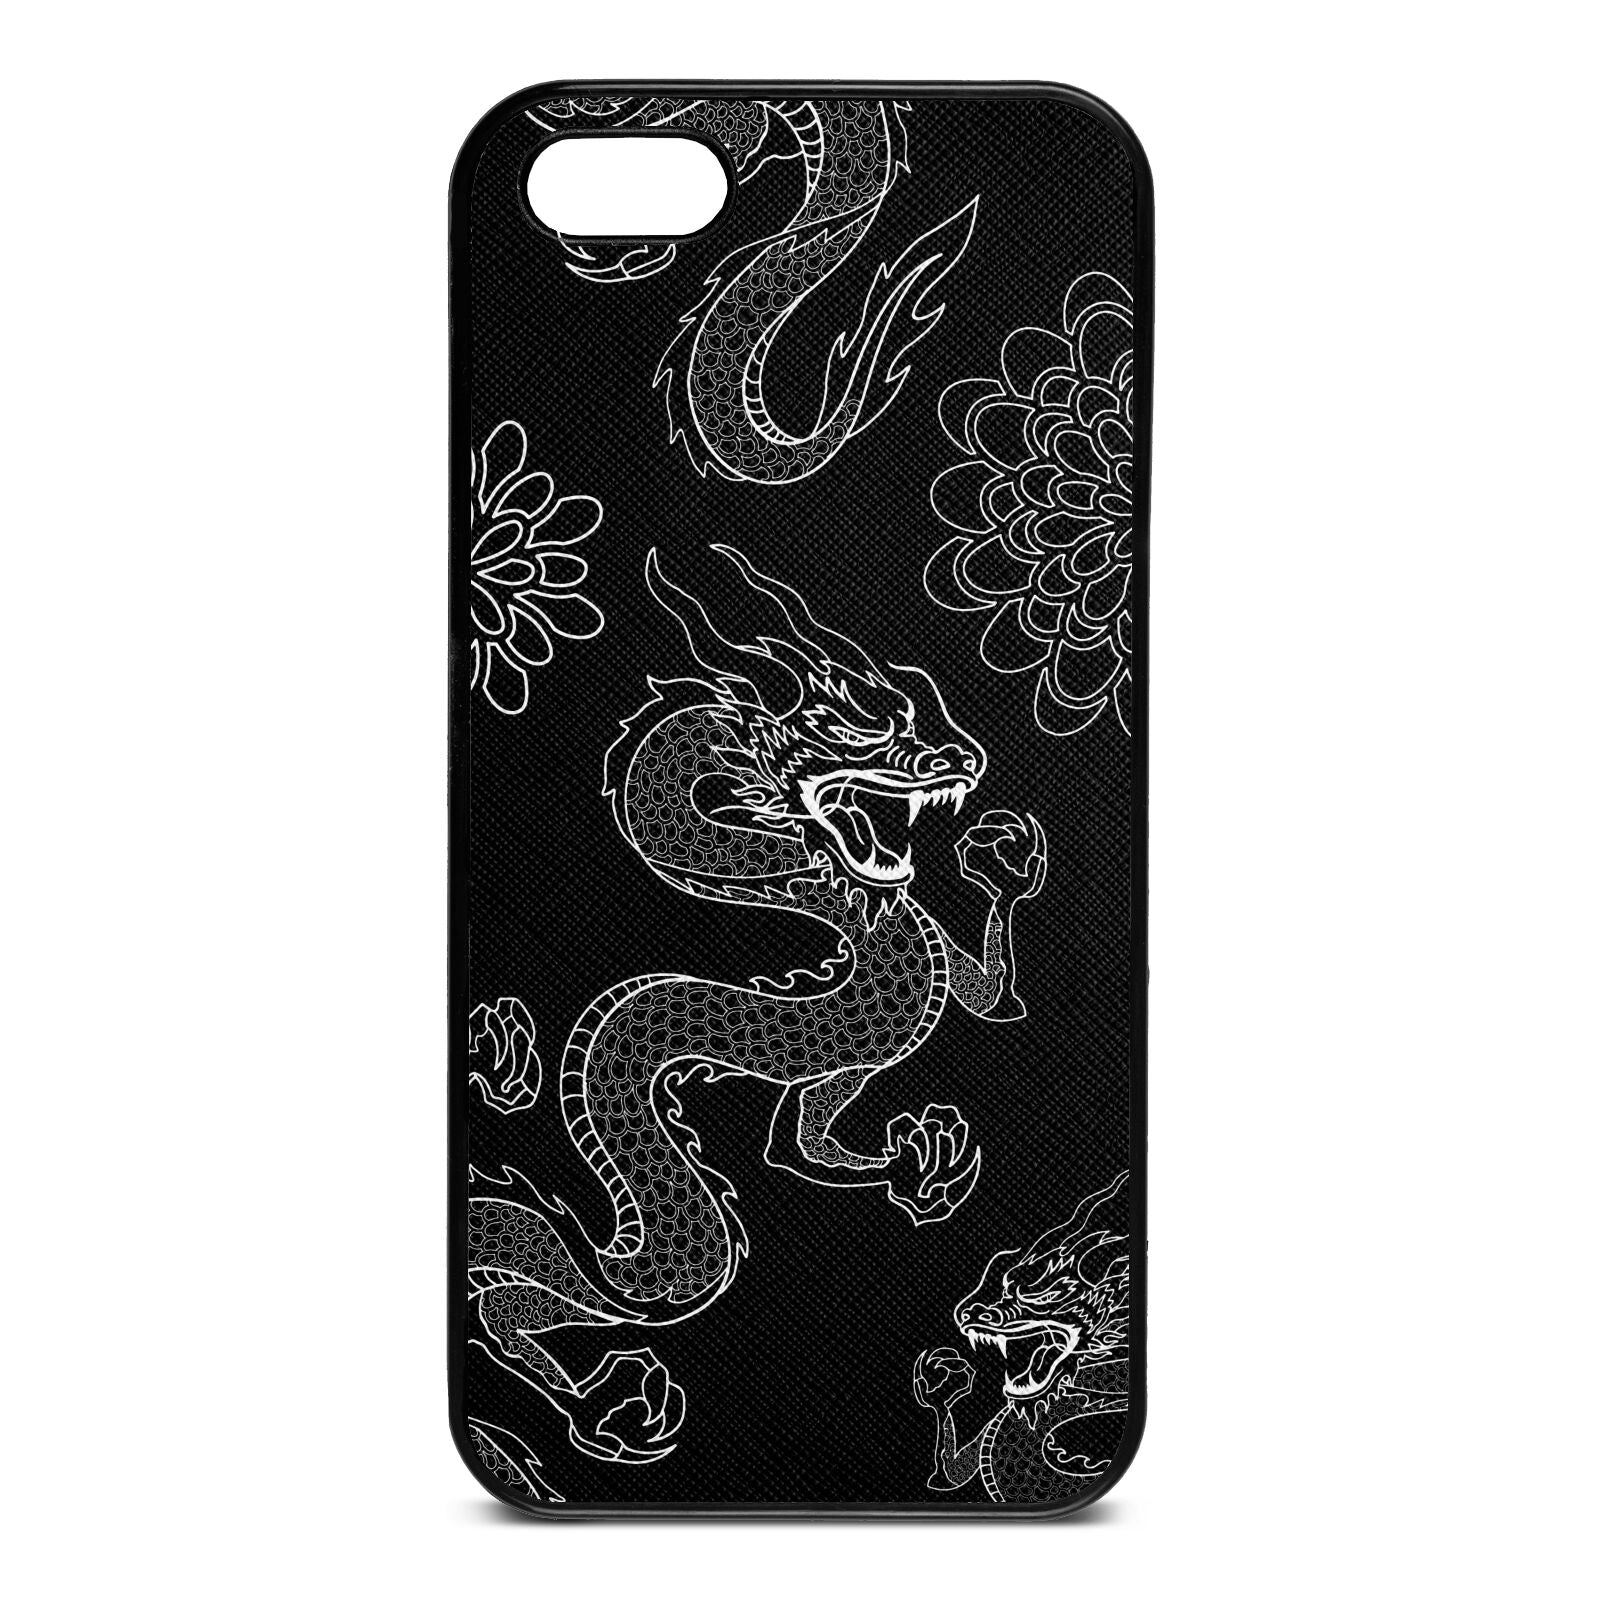 Dragons Black Saffiano Leather iPhone 5 Case